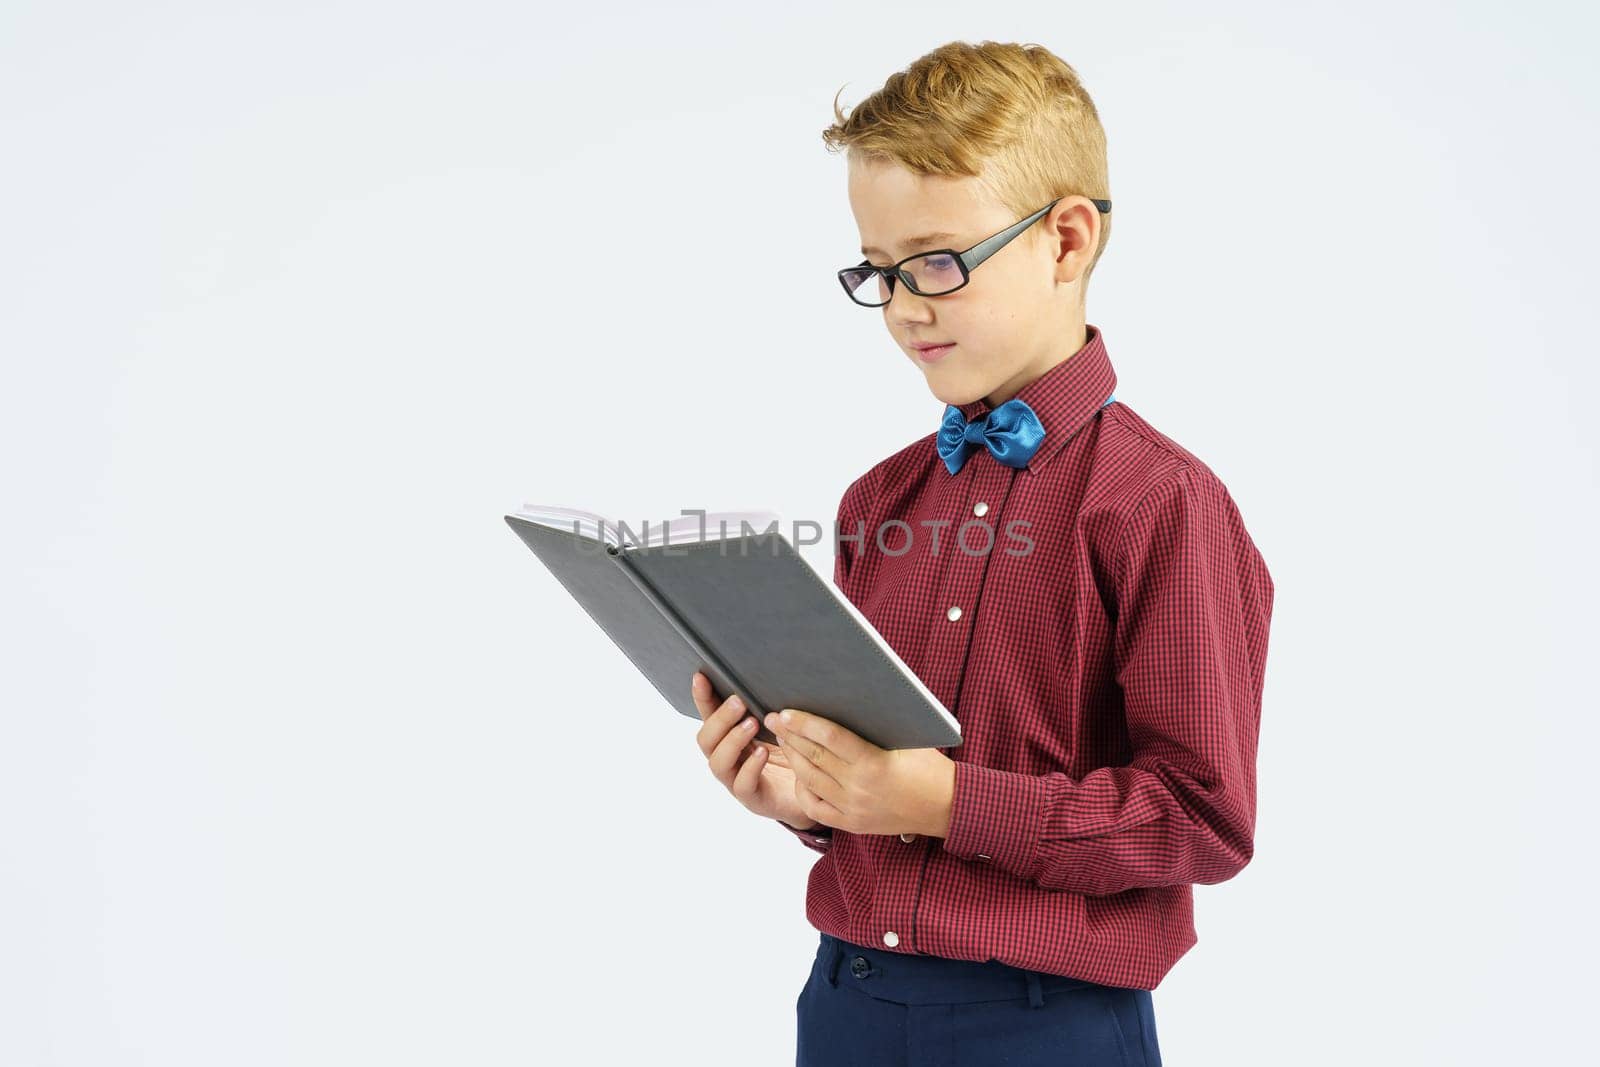 A schoolboy with glasses reads a book he holds in his hands. Isolated background. Education concept